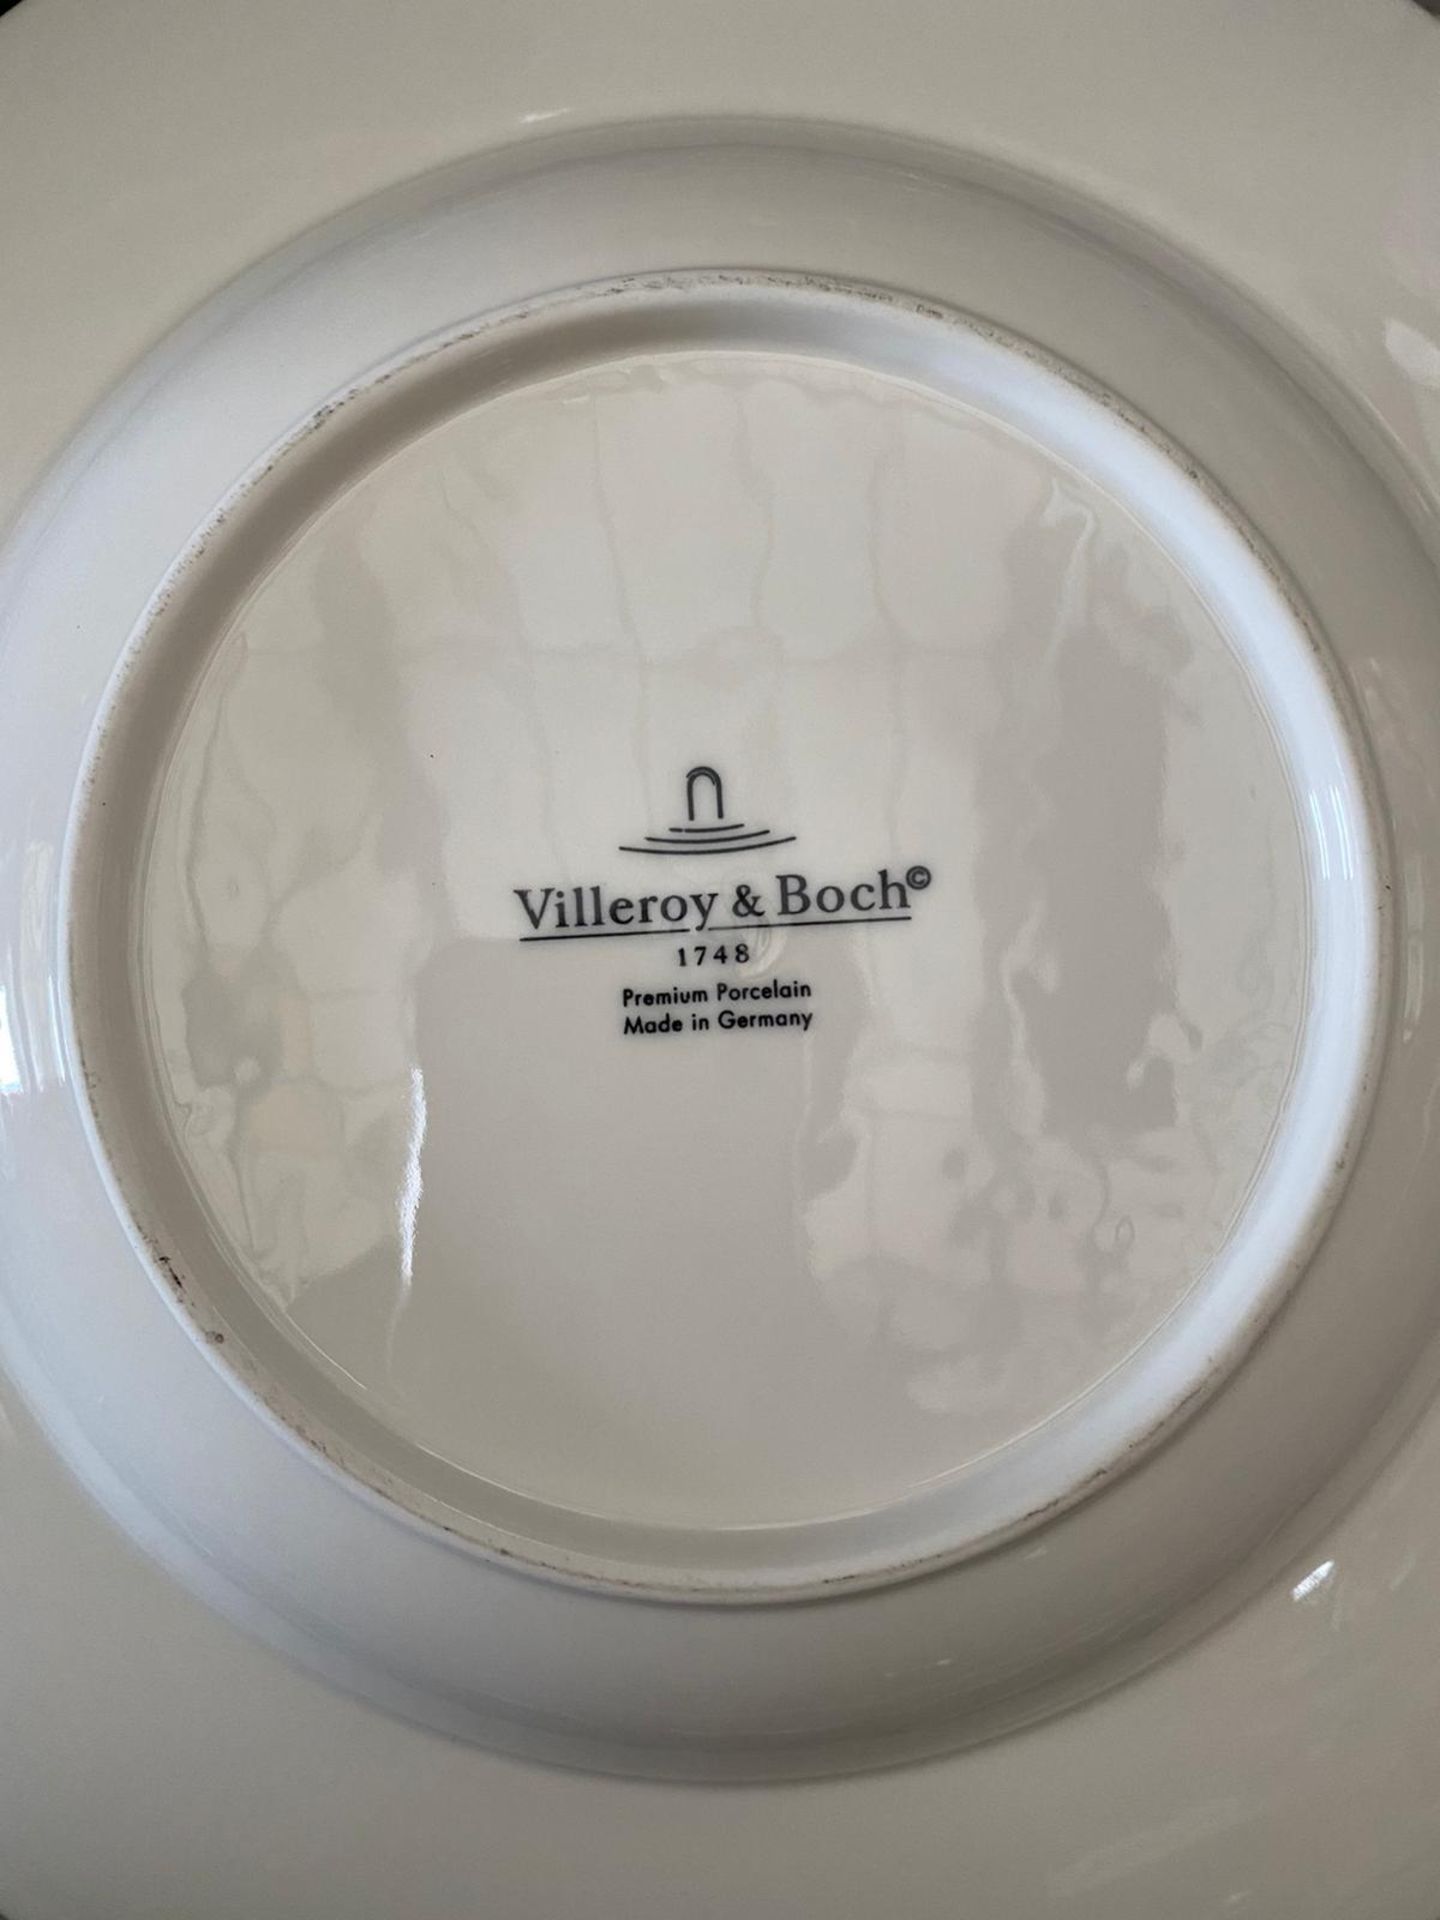 6 x Villeroy & Boch Royal Dinner Plate -290mm (29cm) - Ref: 1044122620 - New and boxed - CL011 - - Image 2 of 5